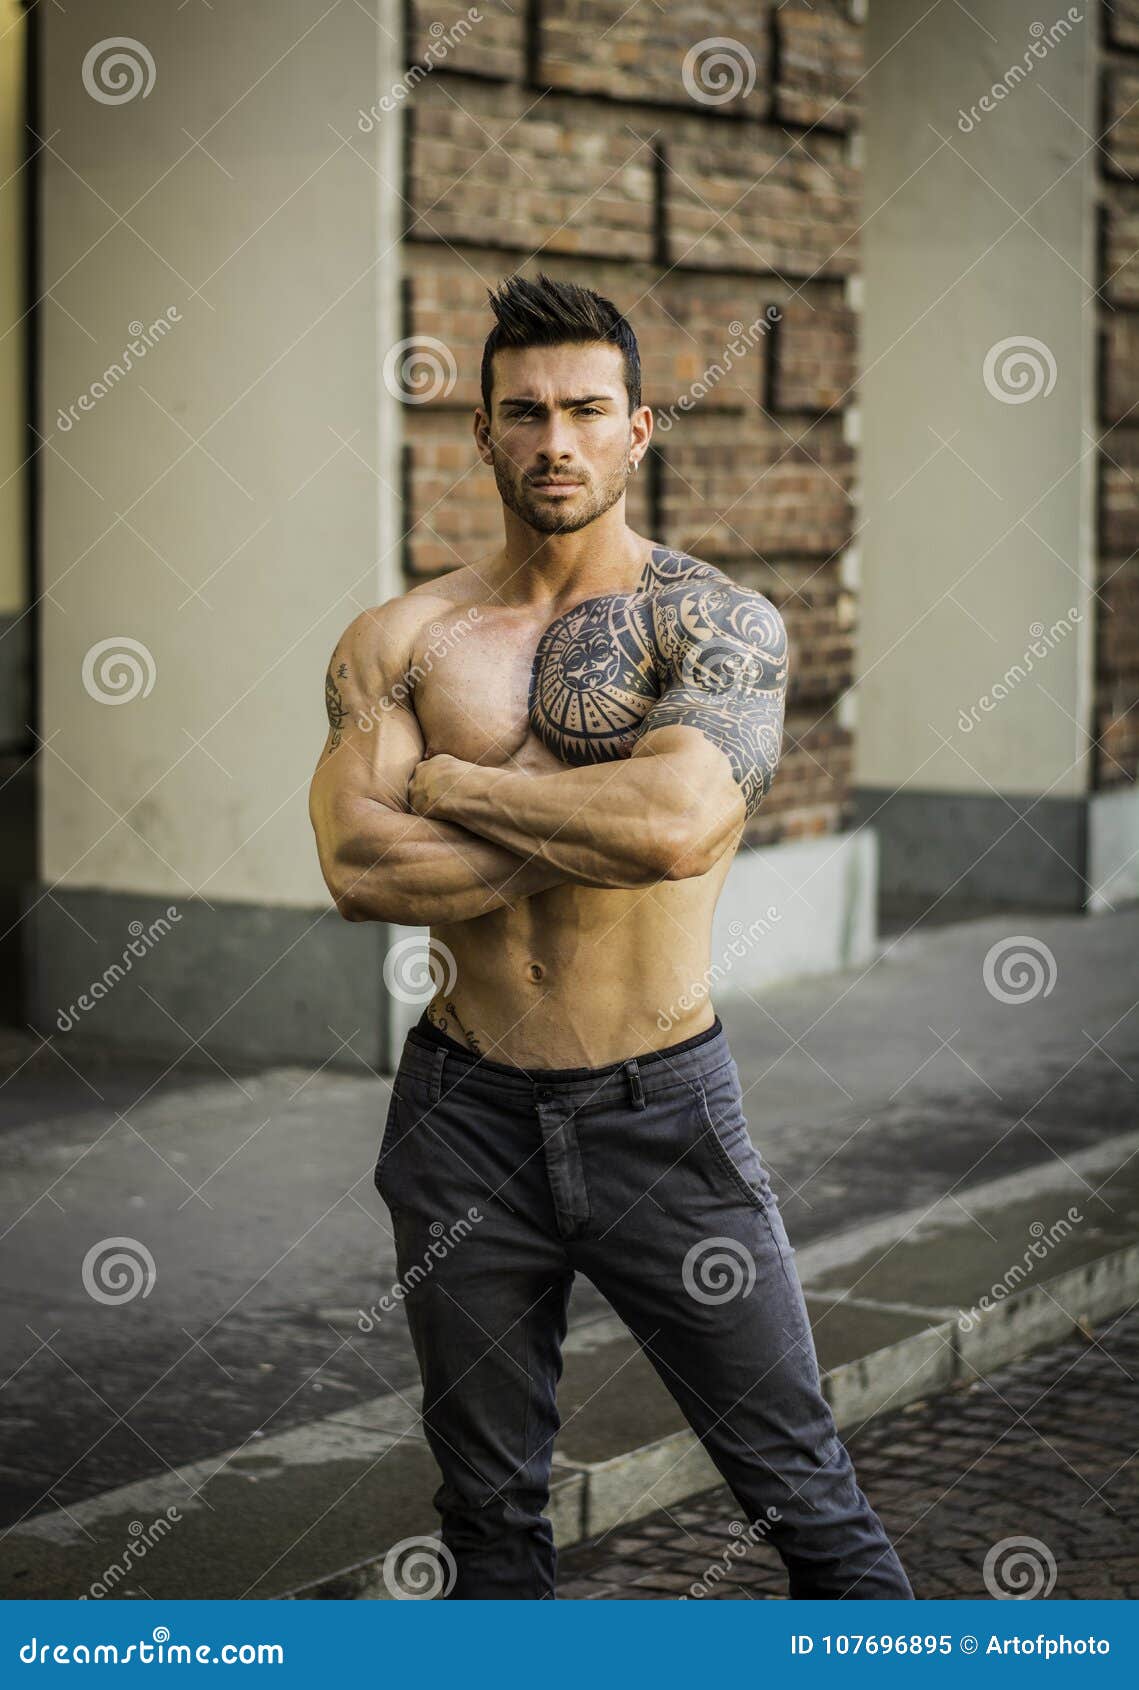 muscular shirtless man in city centre